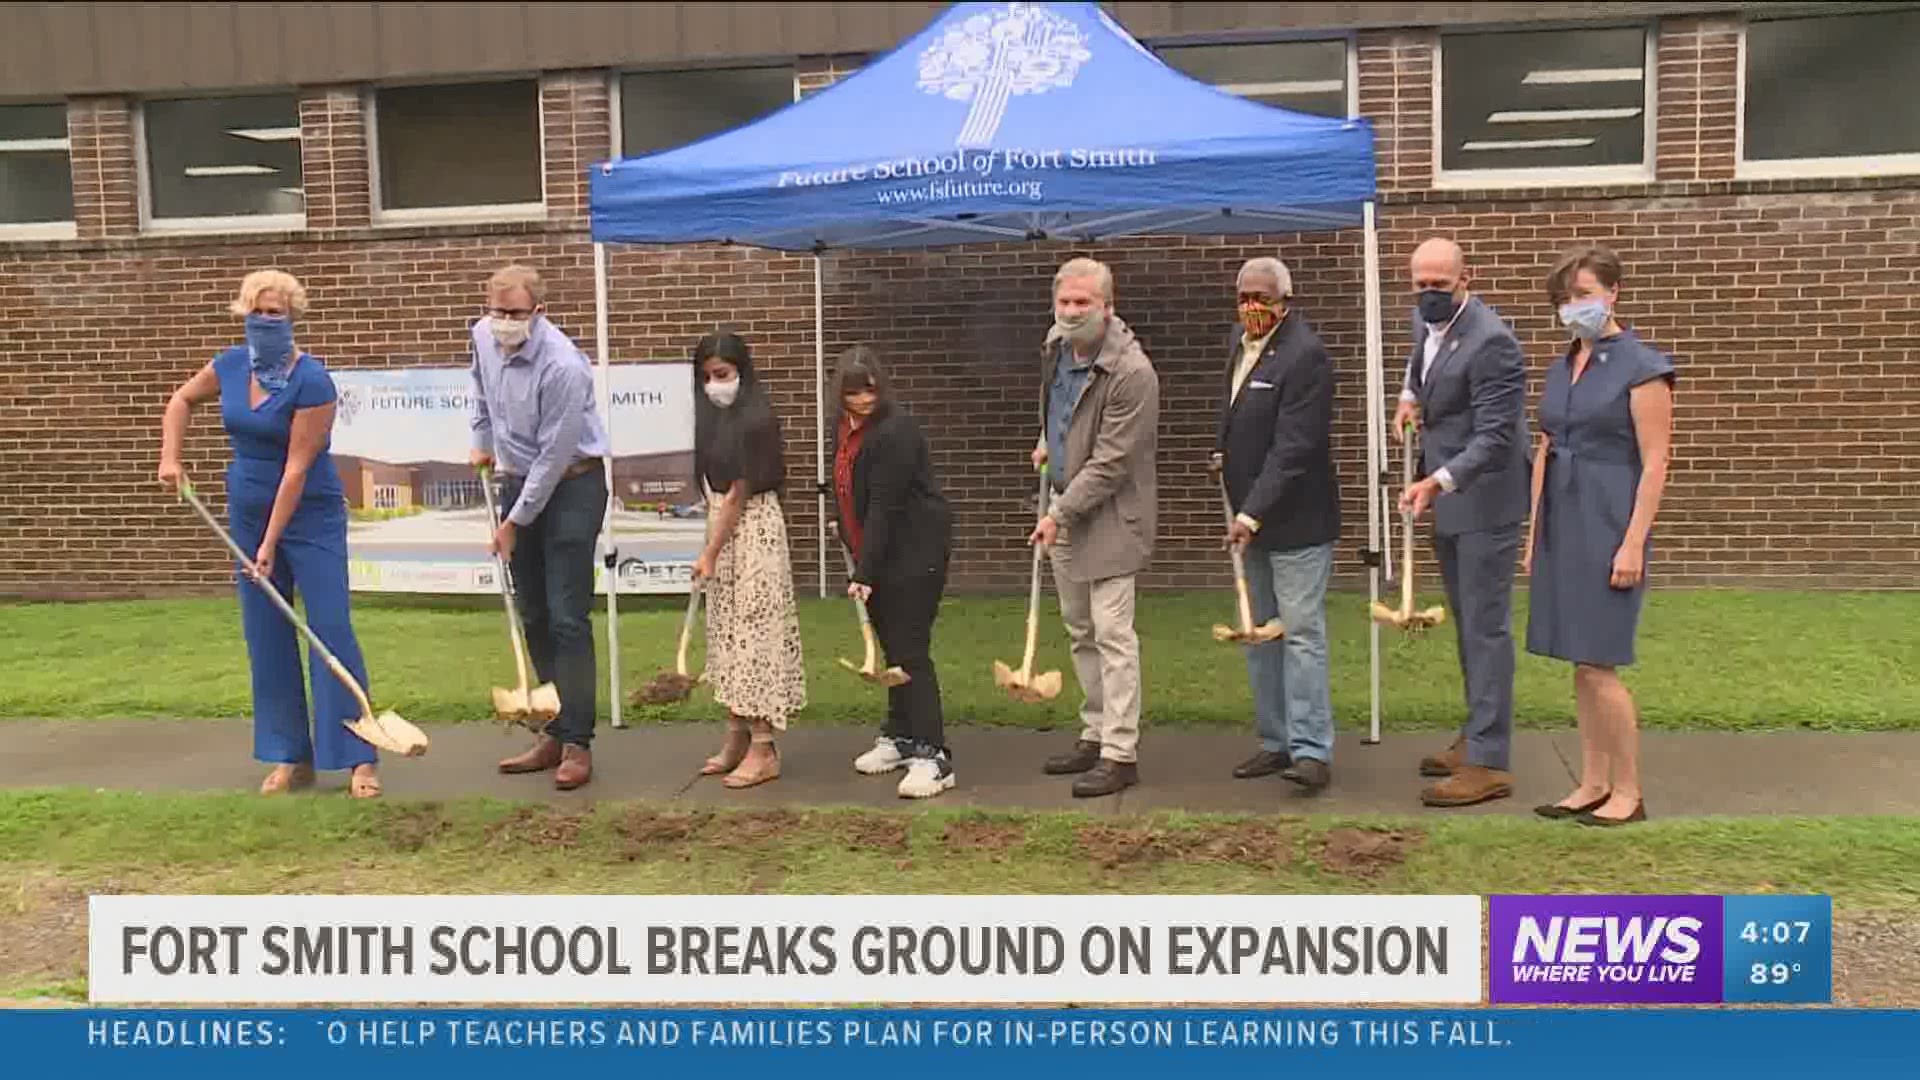 Officials broke ground on the expansion for the Future School of Fort Smith Thursday (Aug. 13).